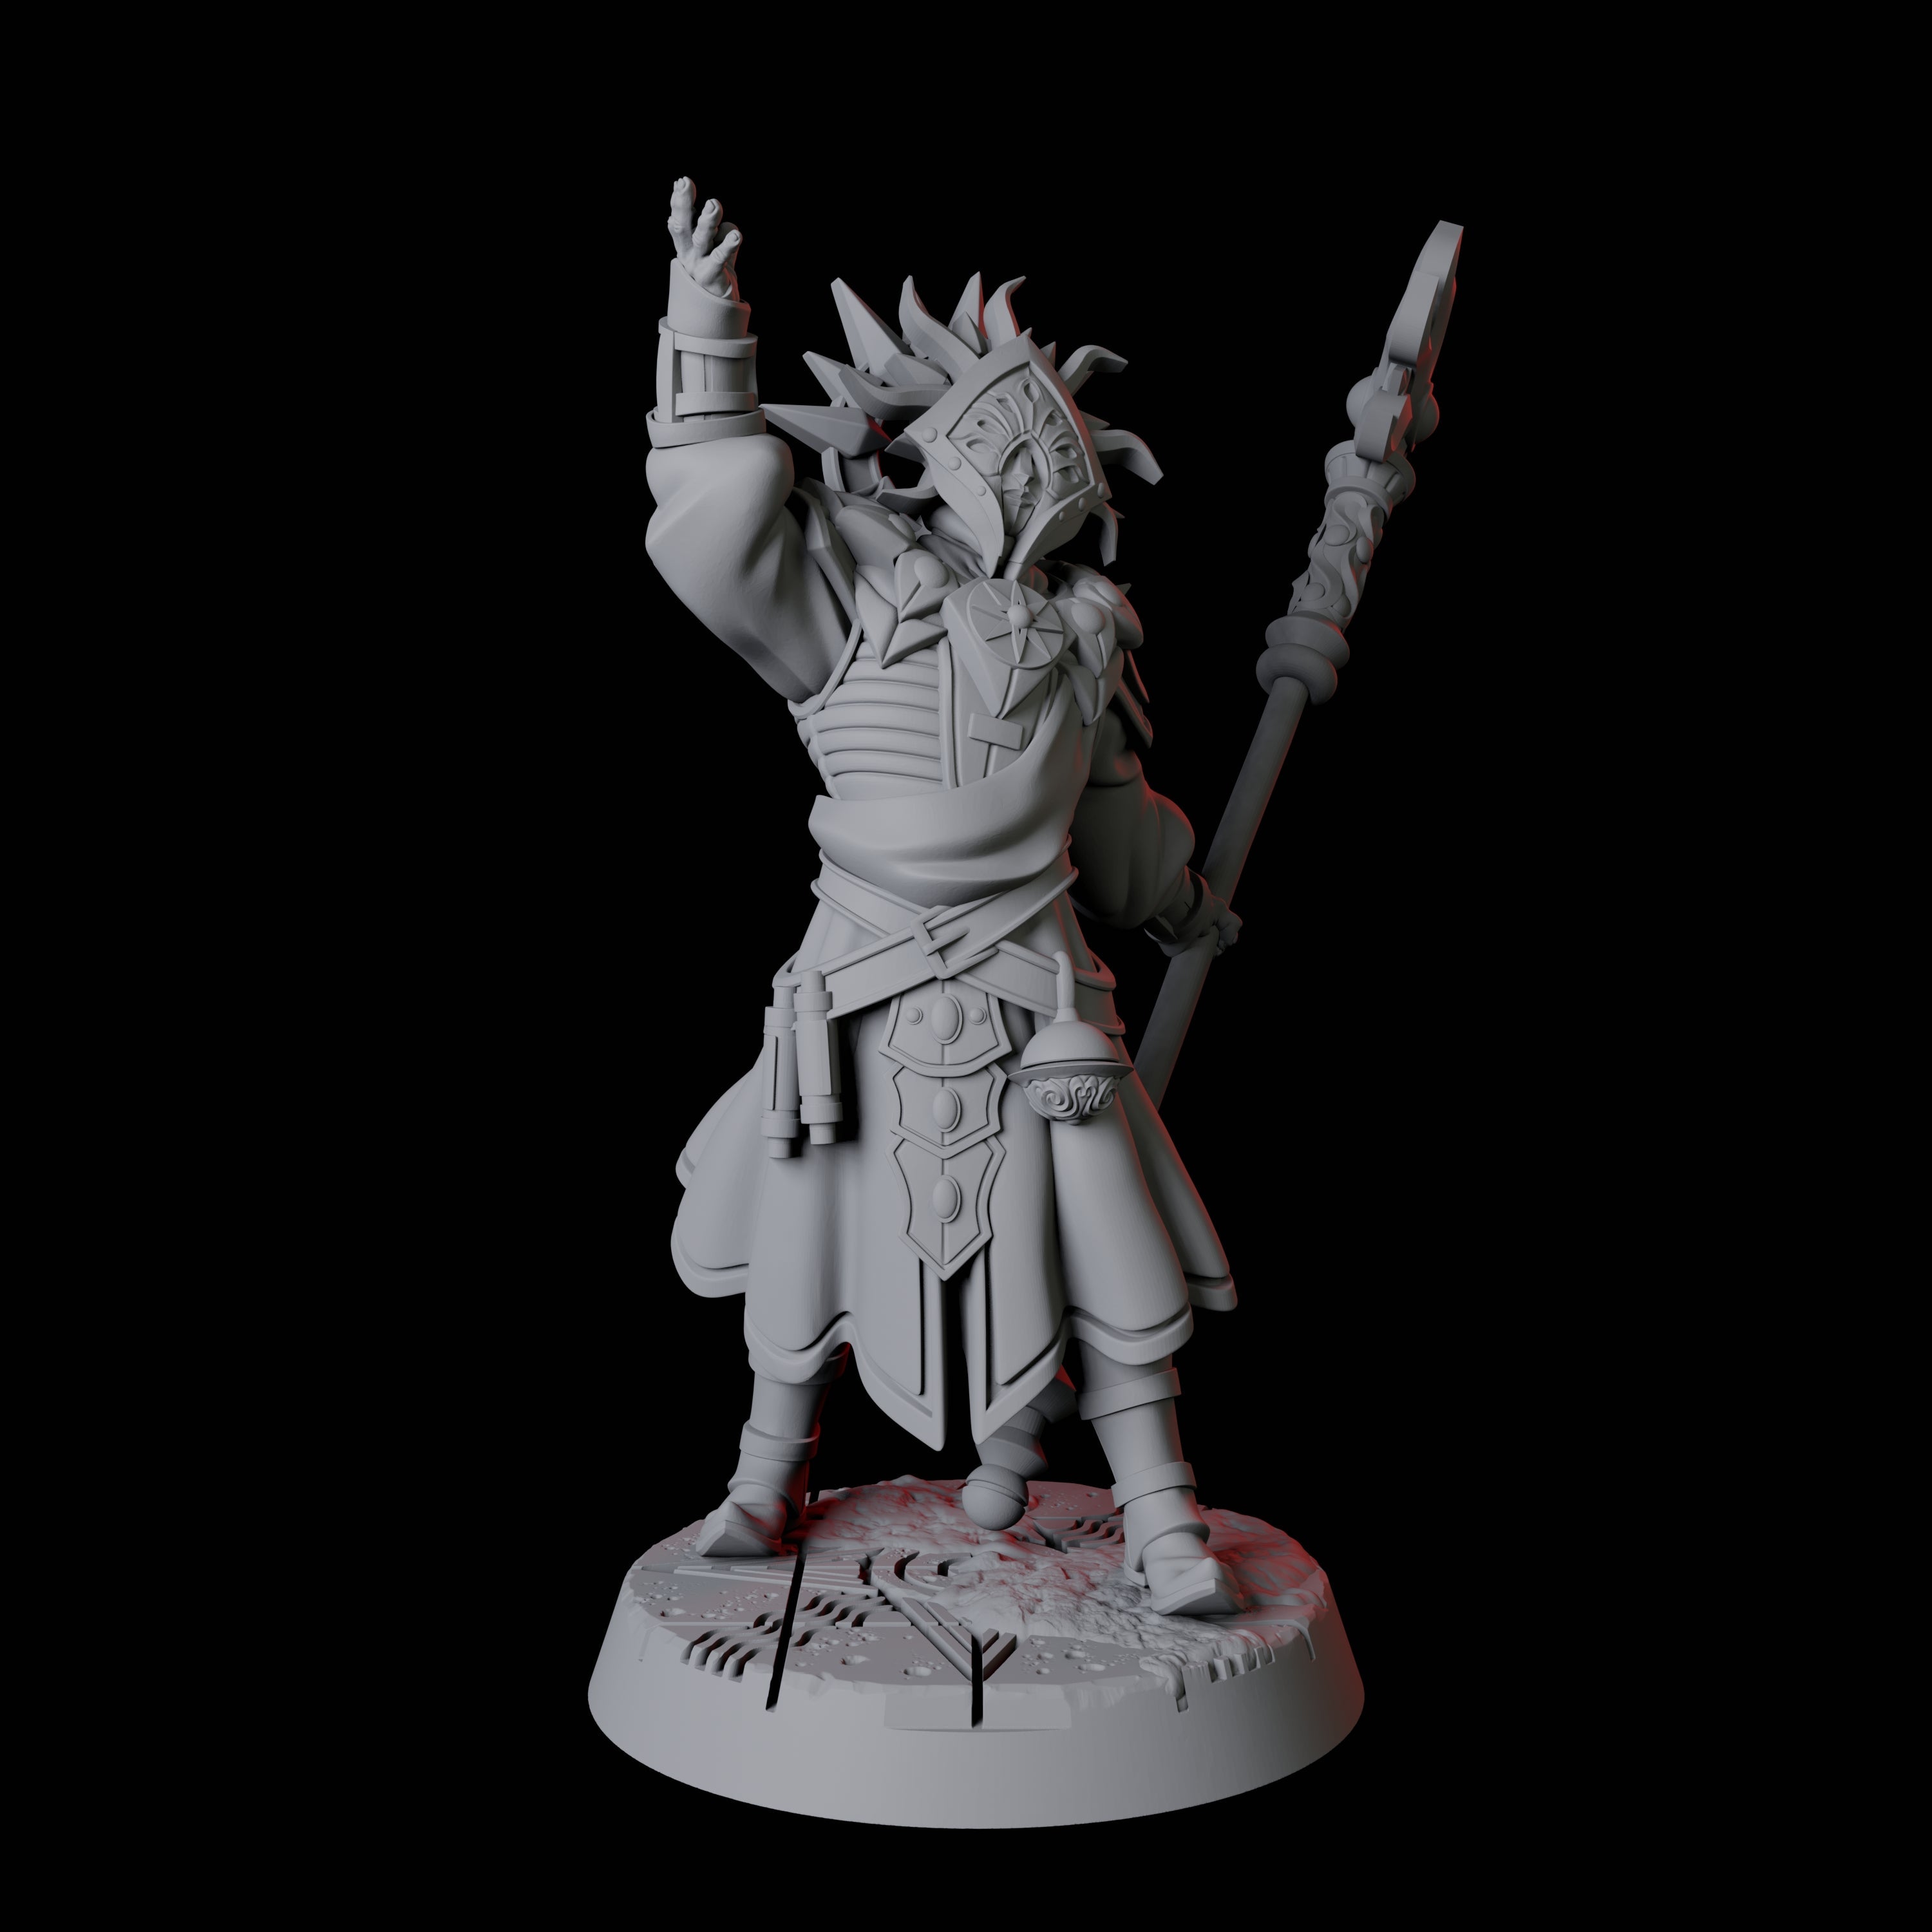 Sun Worshipping Cultist D Miniature for Dungeons and Dragons, Pathfinder or other TTRPGs